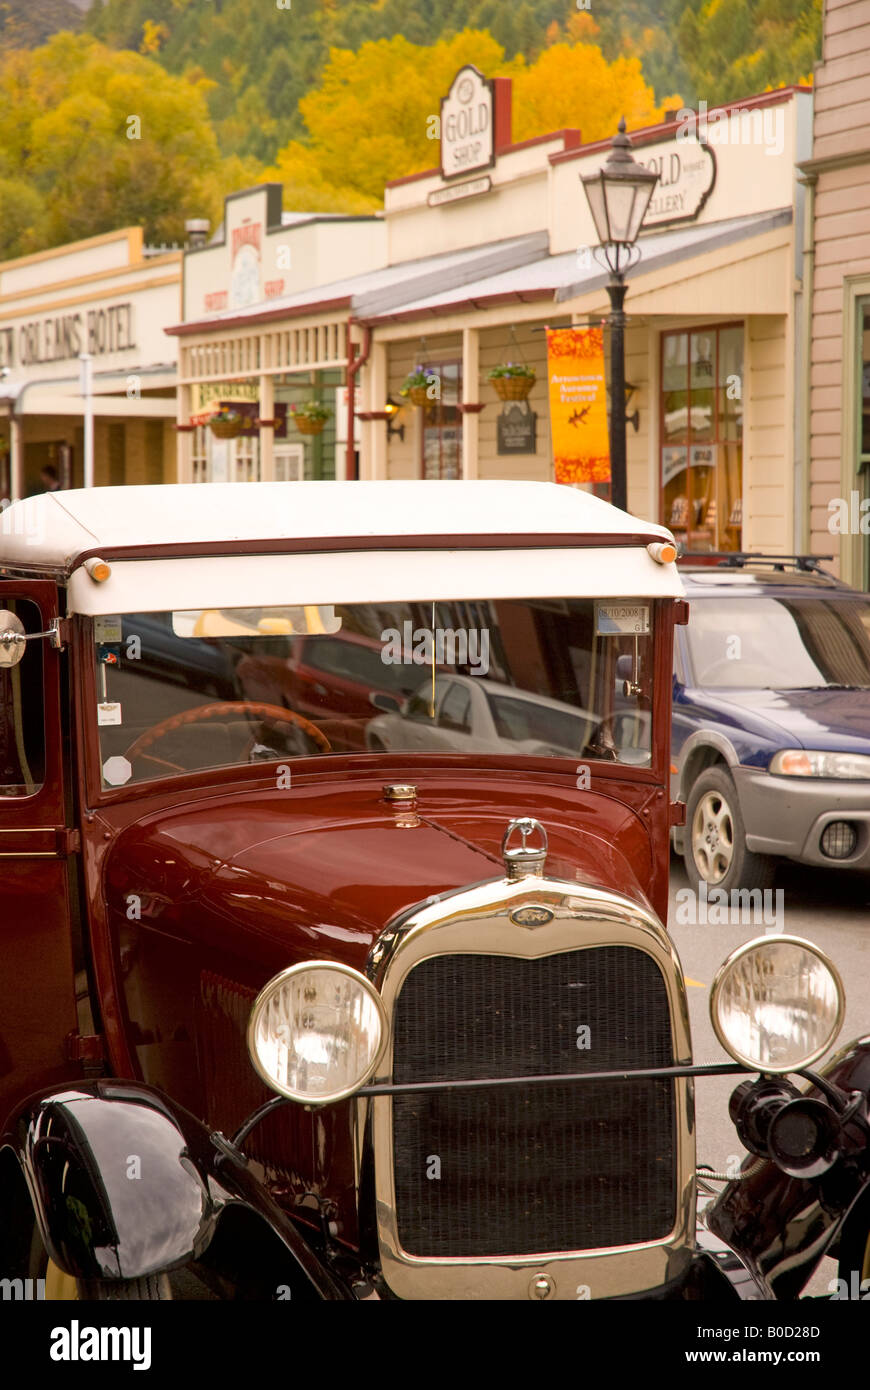 Vintage car parked in Arrow town in autumn, New Zealand Stock Photo